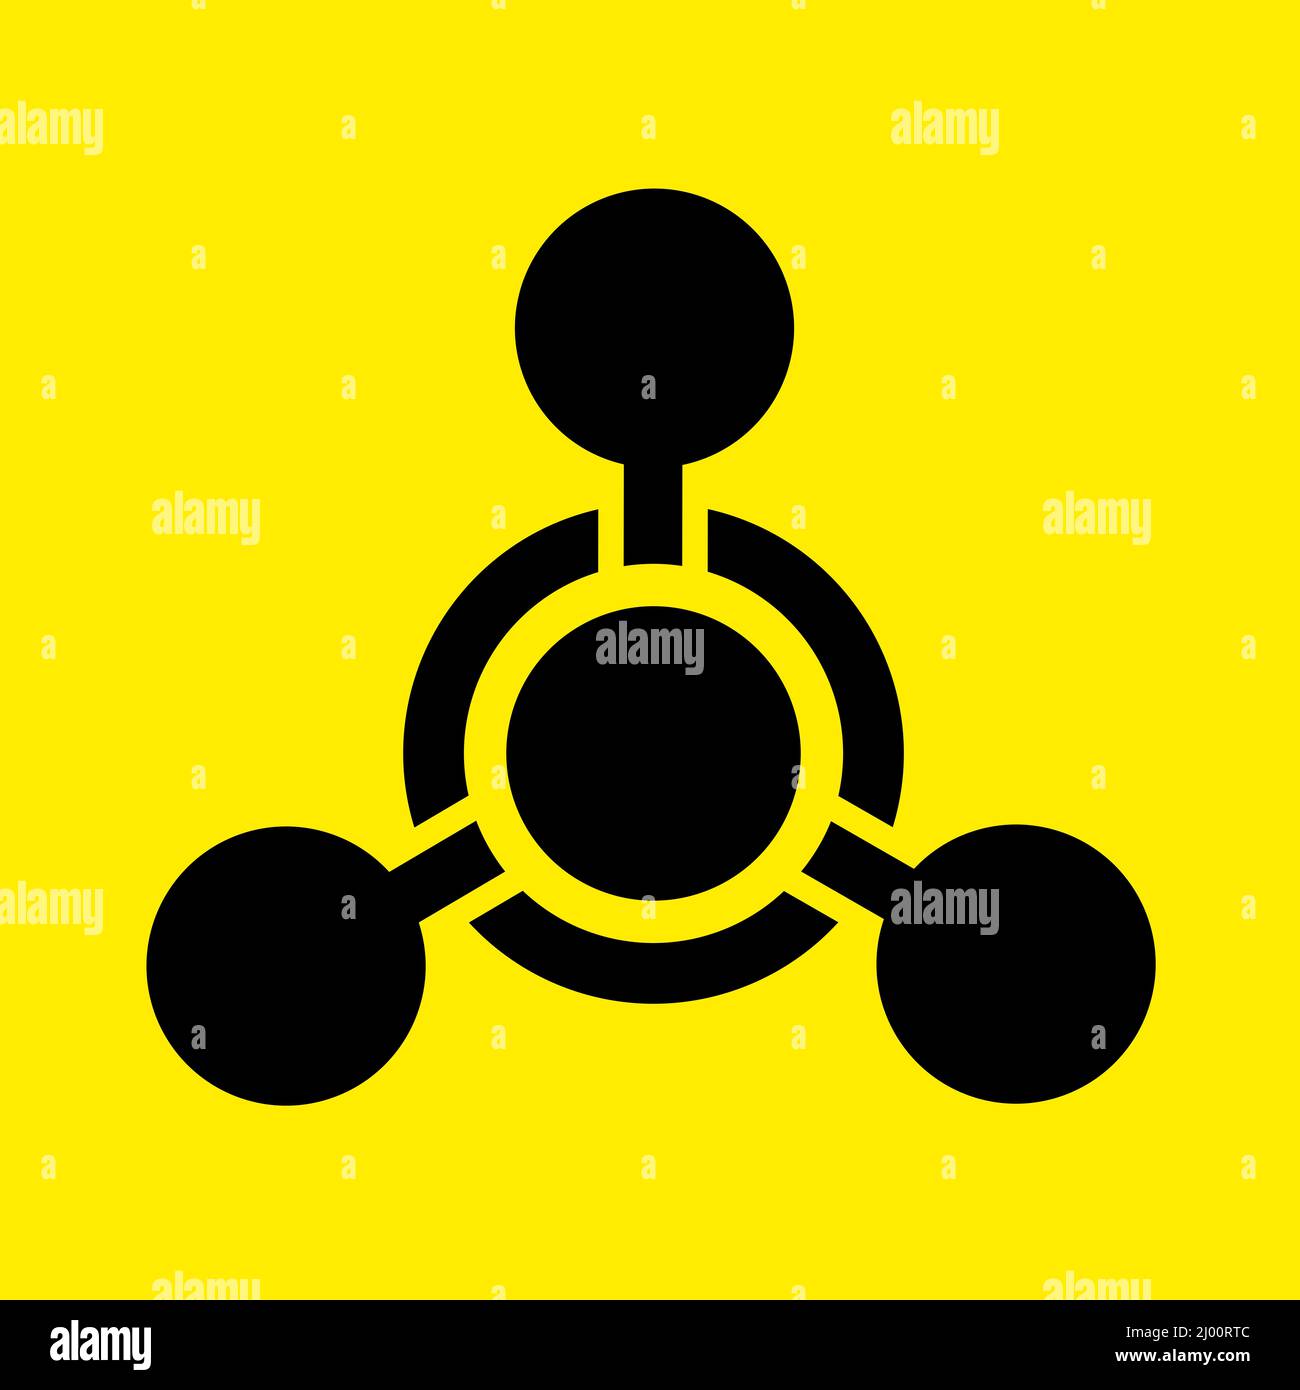 Symbol, sign and pictogram of Chemical weapon. Vector illustration on plain yellow background. Stock Photo